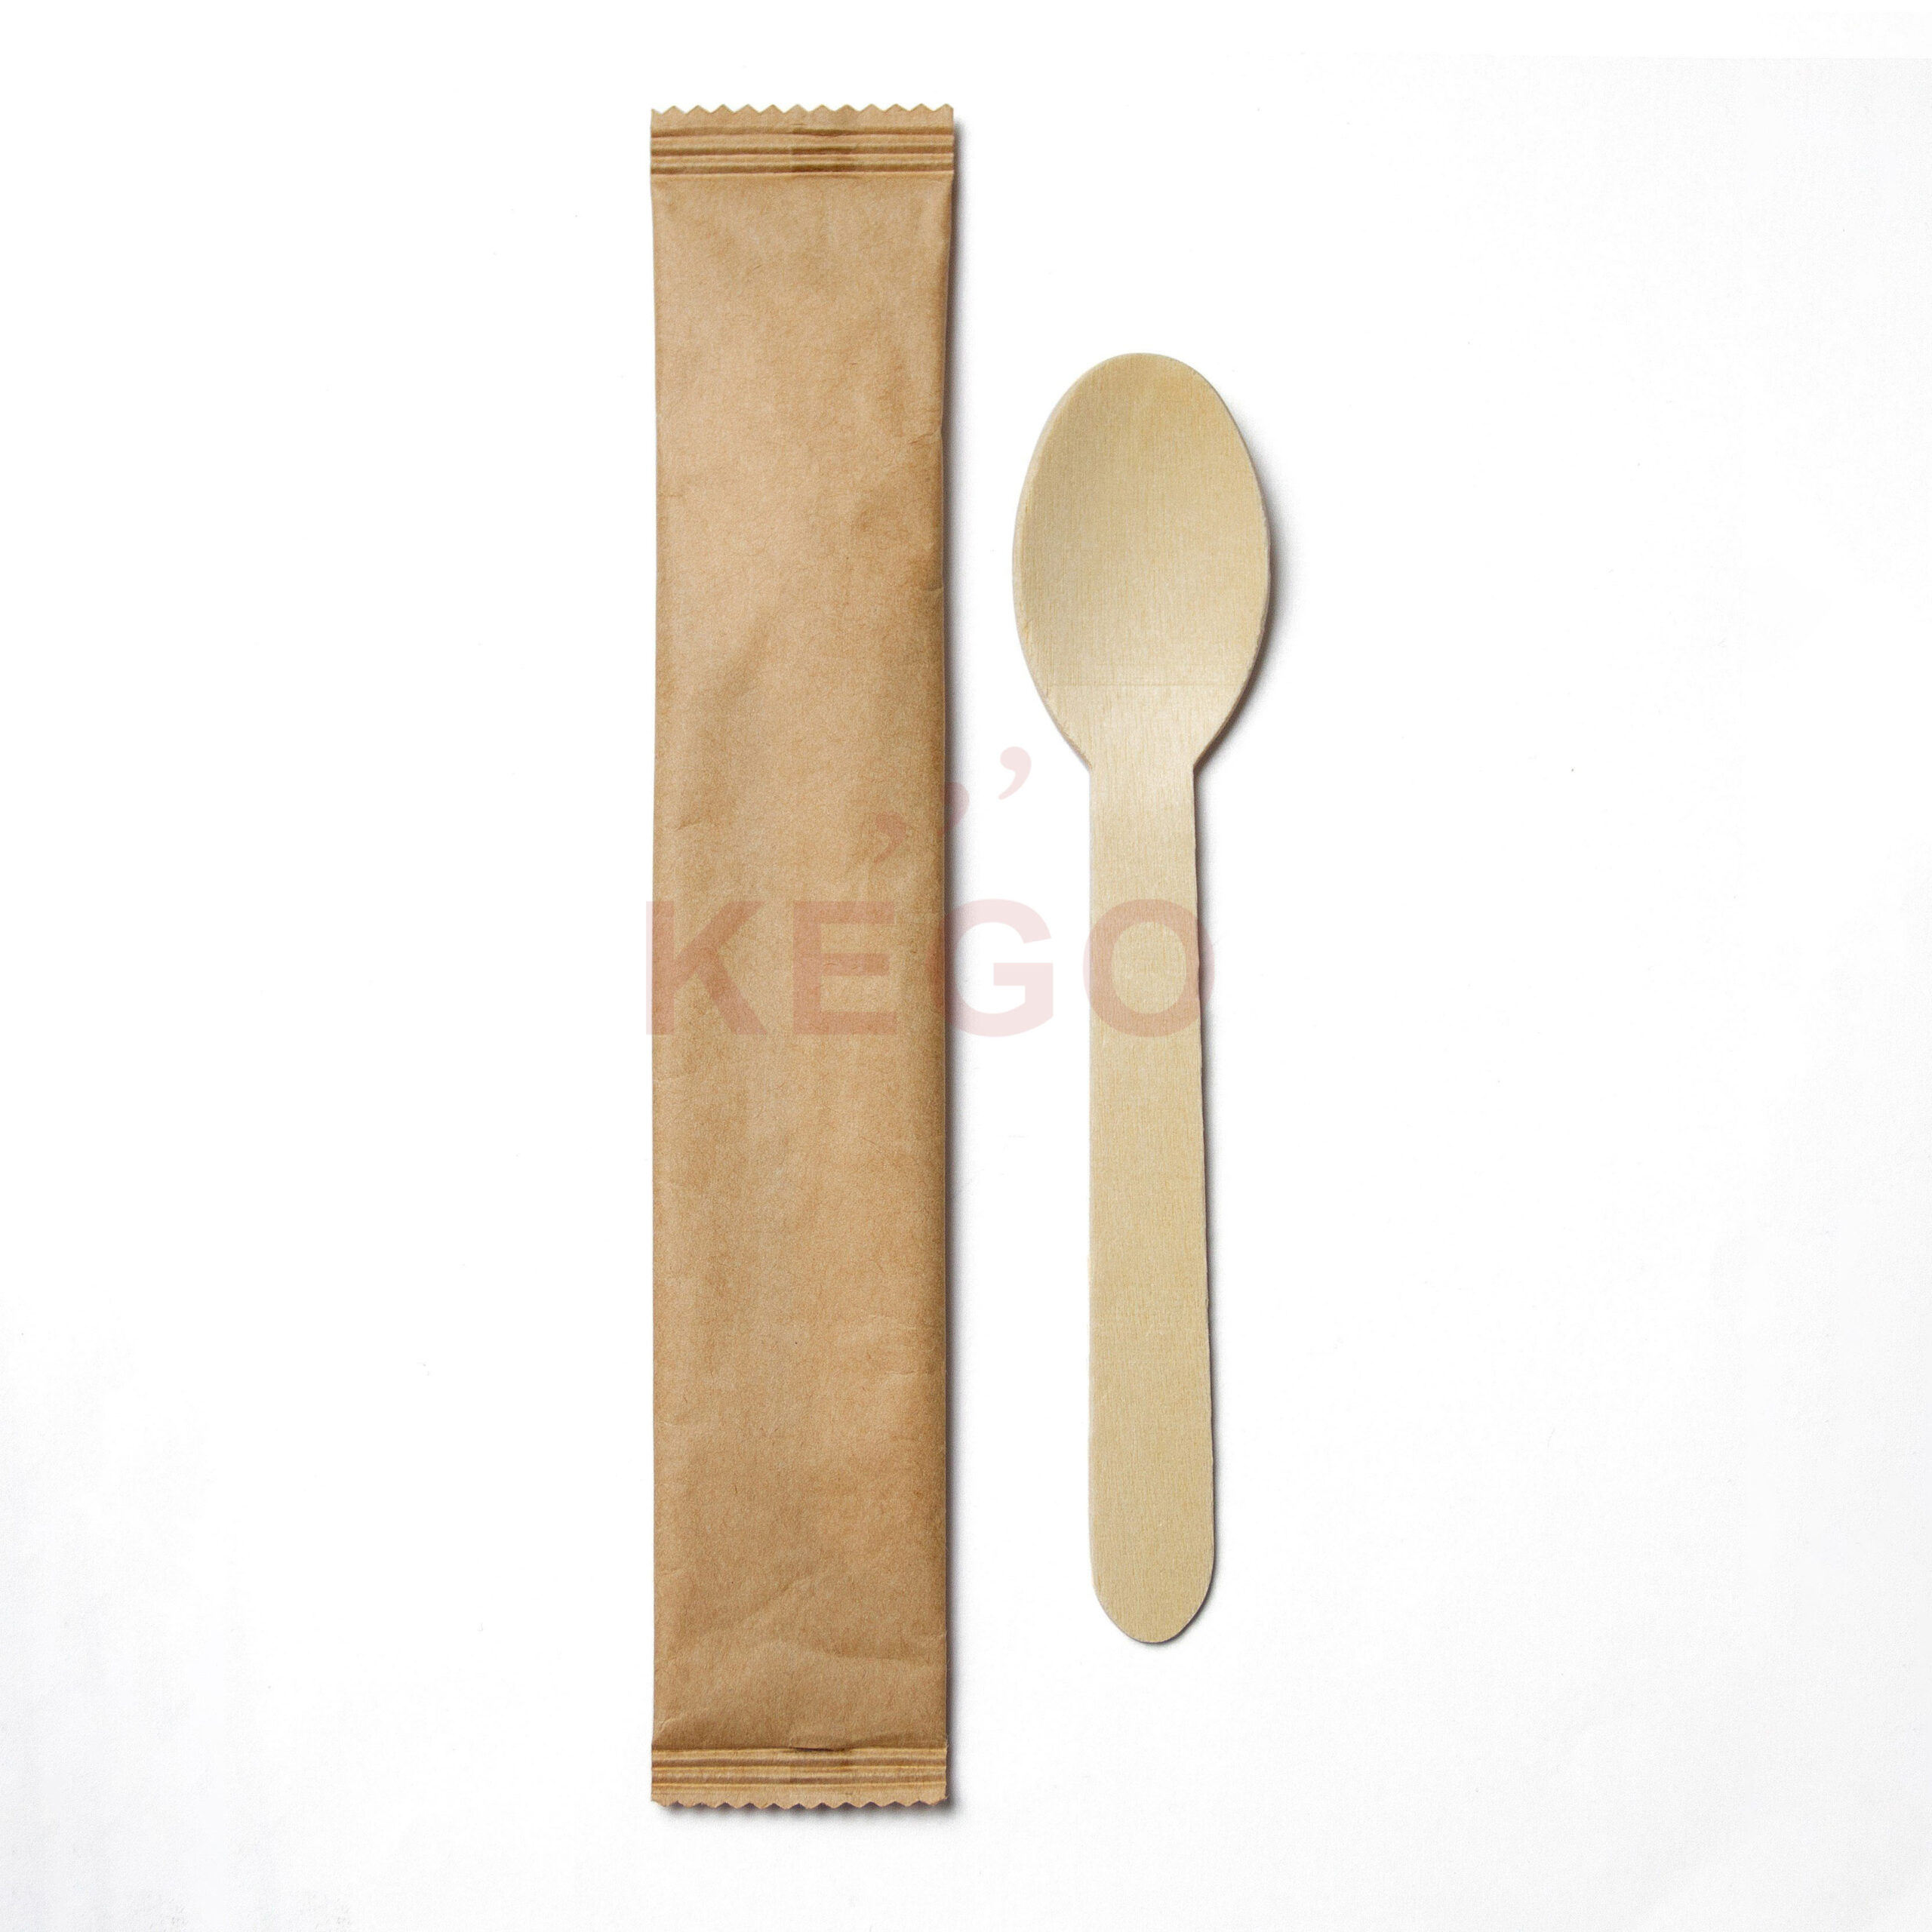 https://disposablewoodencutlery.com/wp-content/uploads/2015/09/Individual-Set-1-scaled.jpg